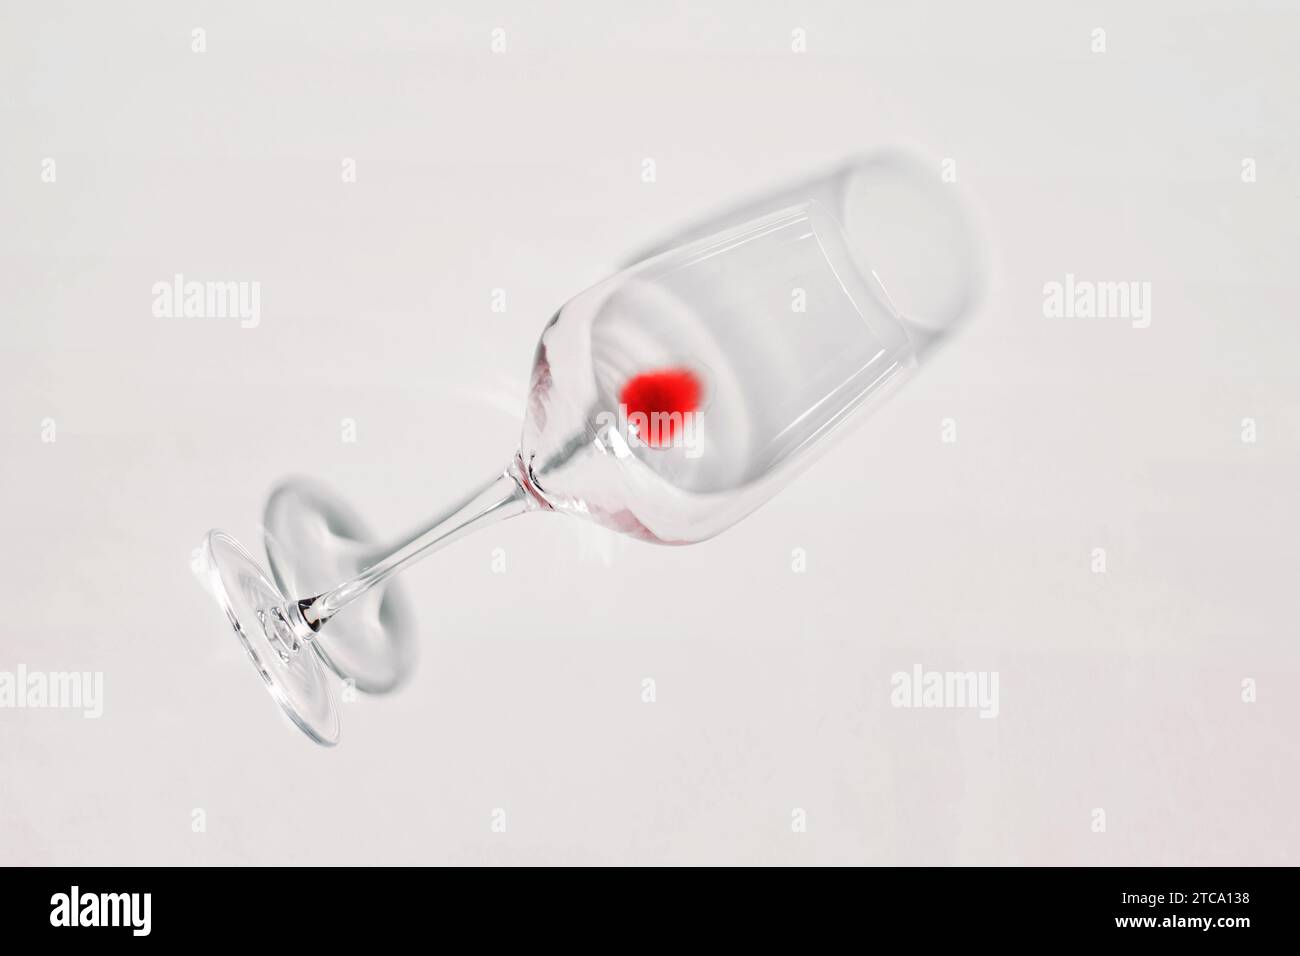 Wine glass with drop of red wine left, isolated on white. Dry january, quit drinking, alcohol problems concept, Stock Photo